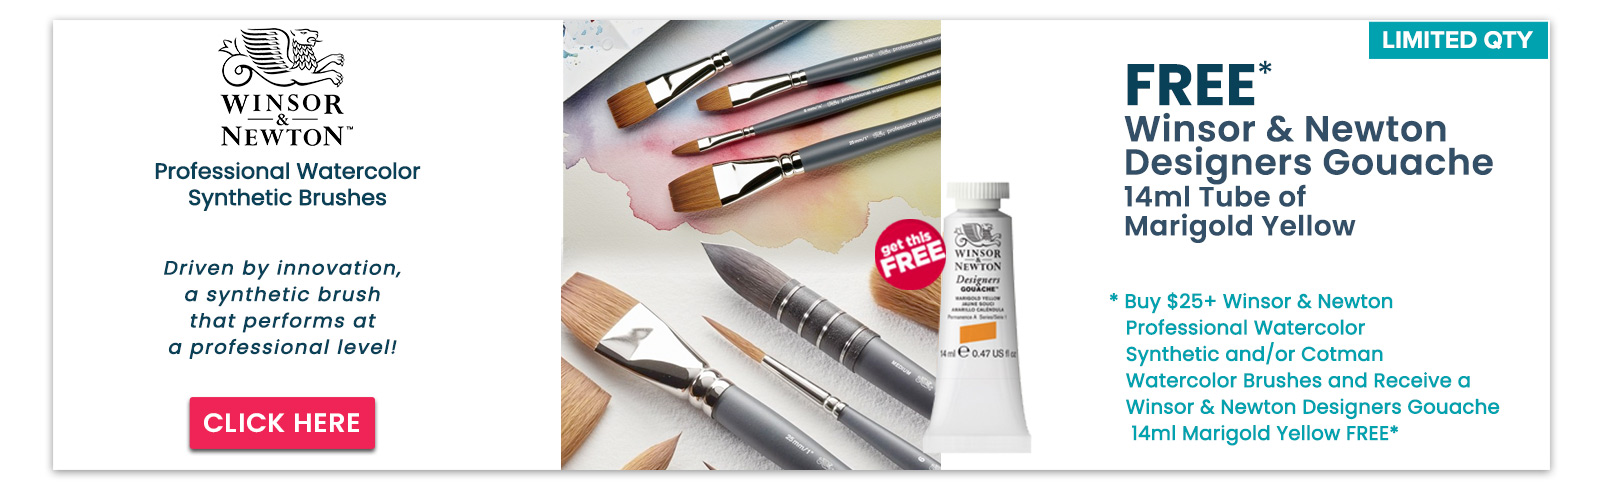 Winsor & Newton Professional Watercolor Synthetic Brushes + Special Offer